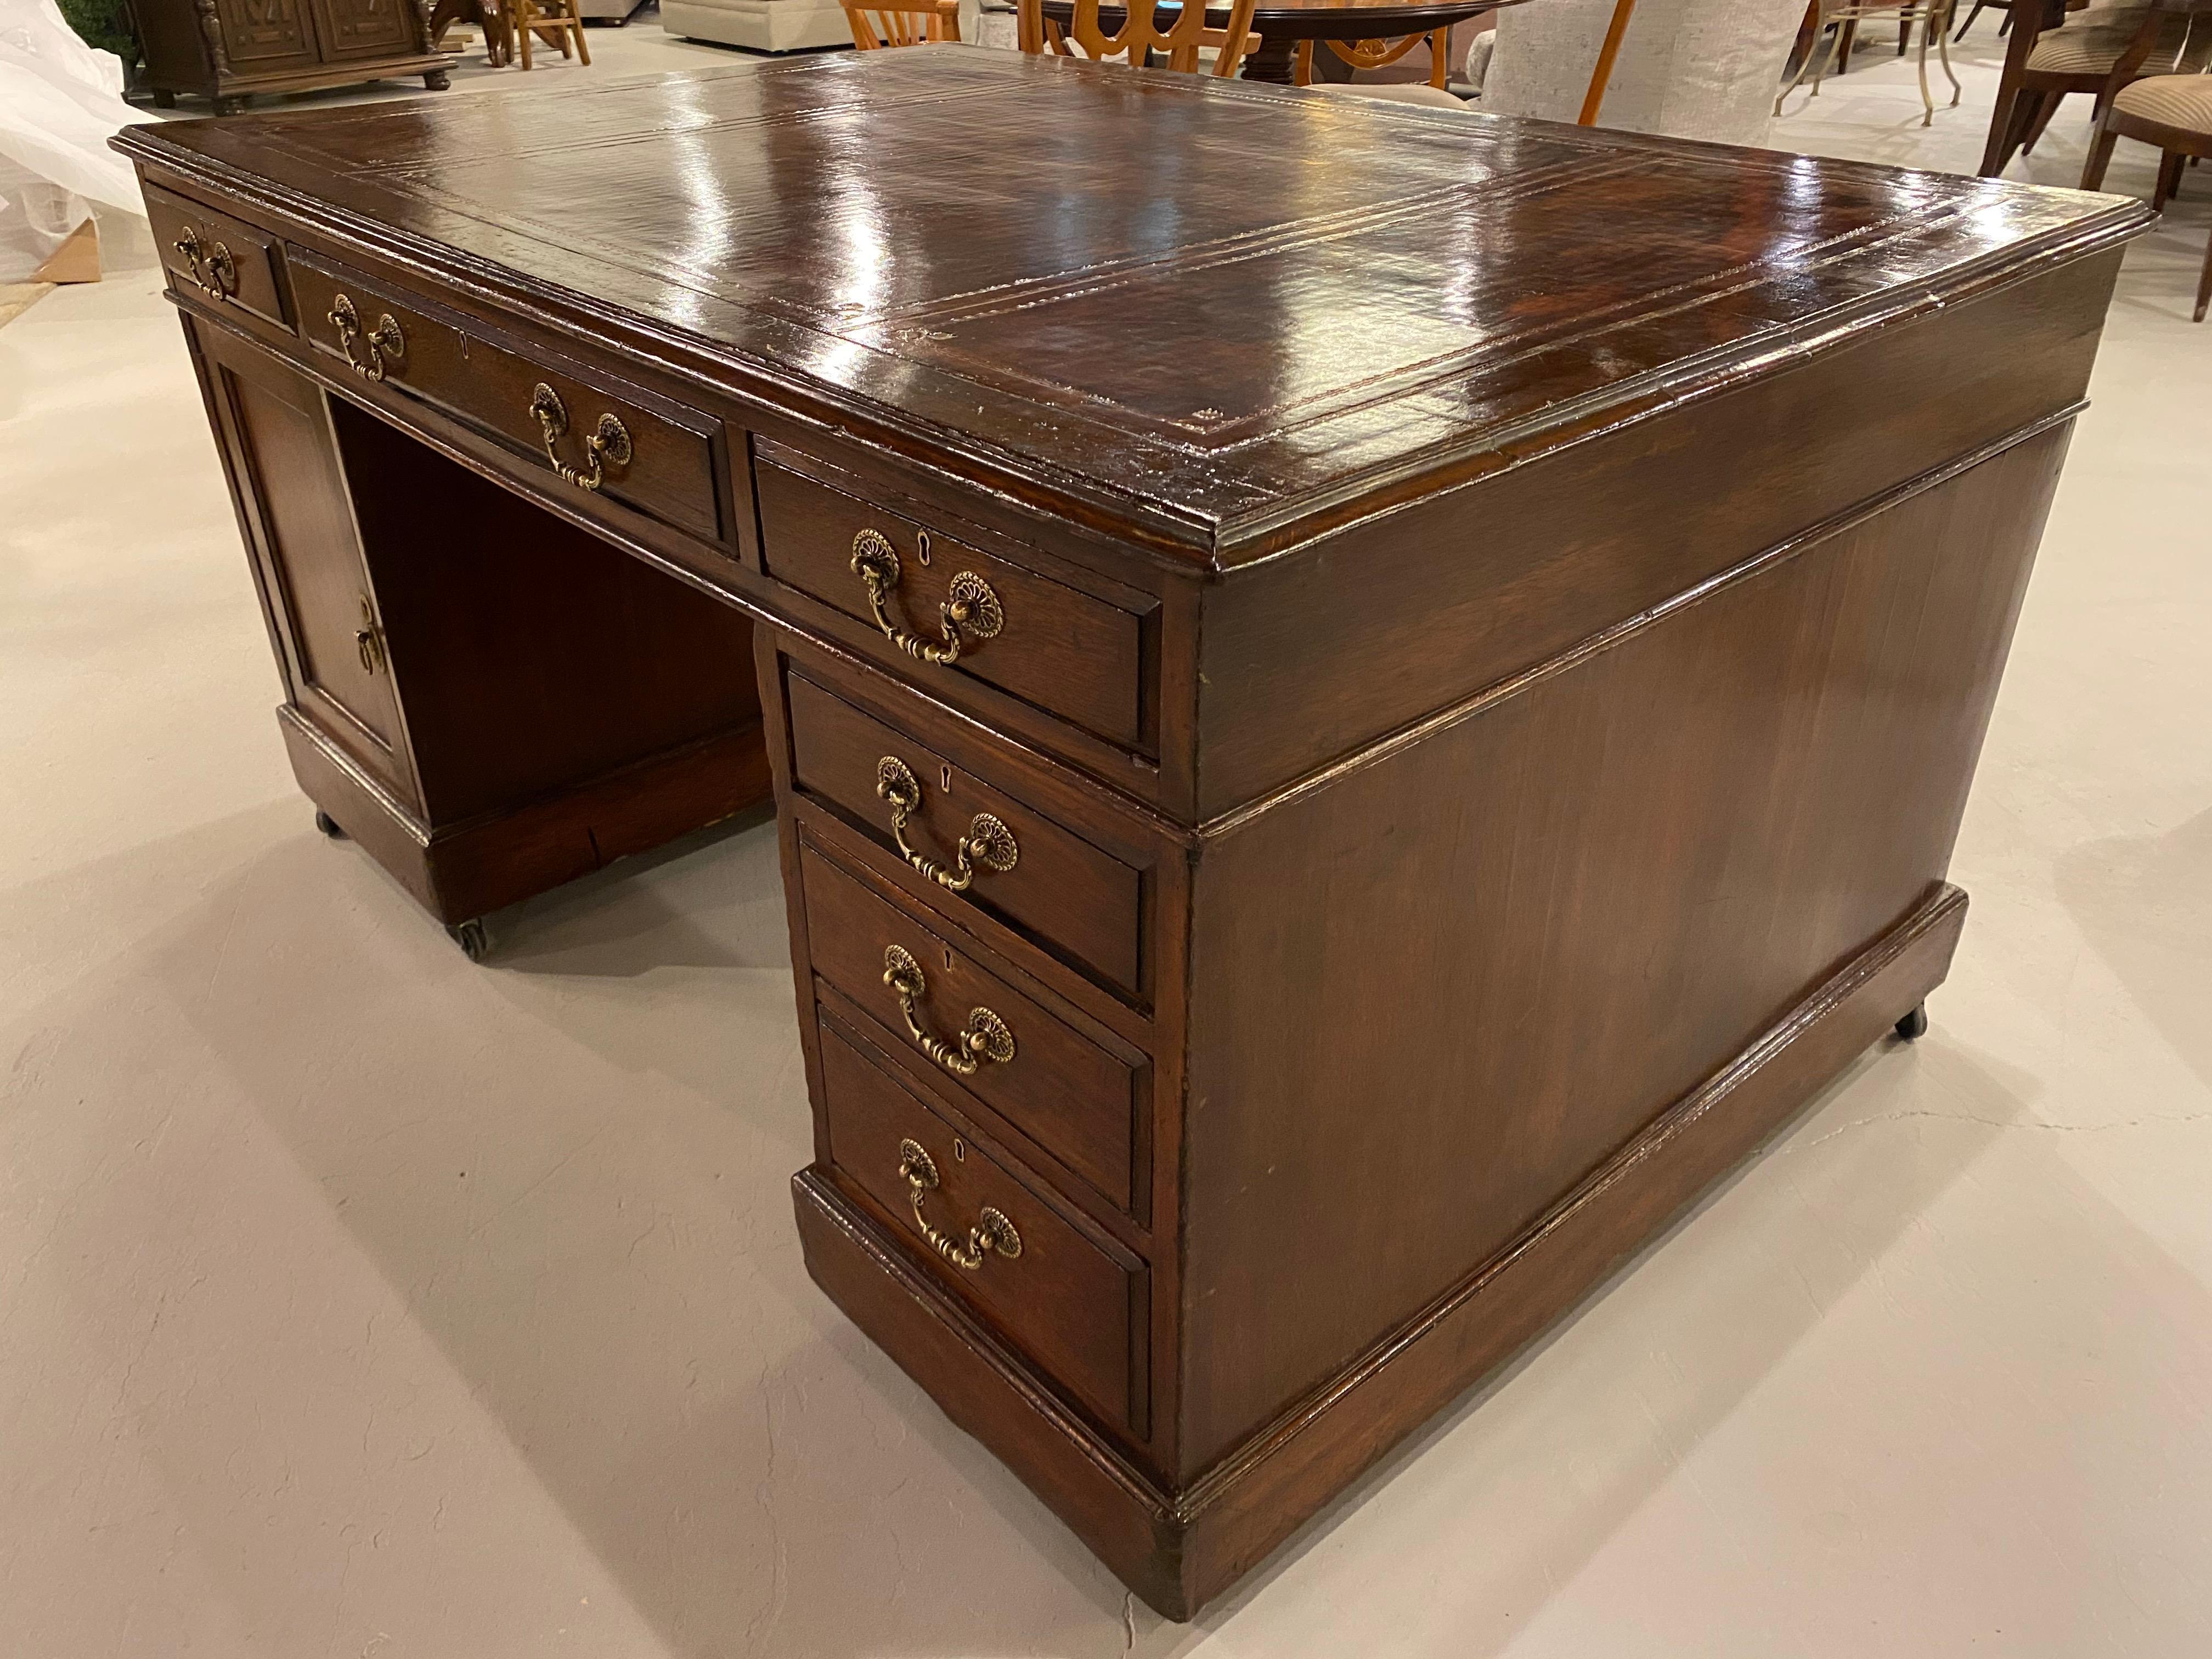 A wonderful probably, 19th century oak partners desk, with a leather writing surface. Each side has a bank of drawers and a cupboard door for serious storage, or you can put both banks of drawers on the same side. The leather top has a lovely worn